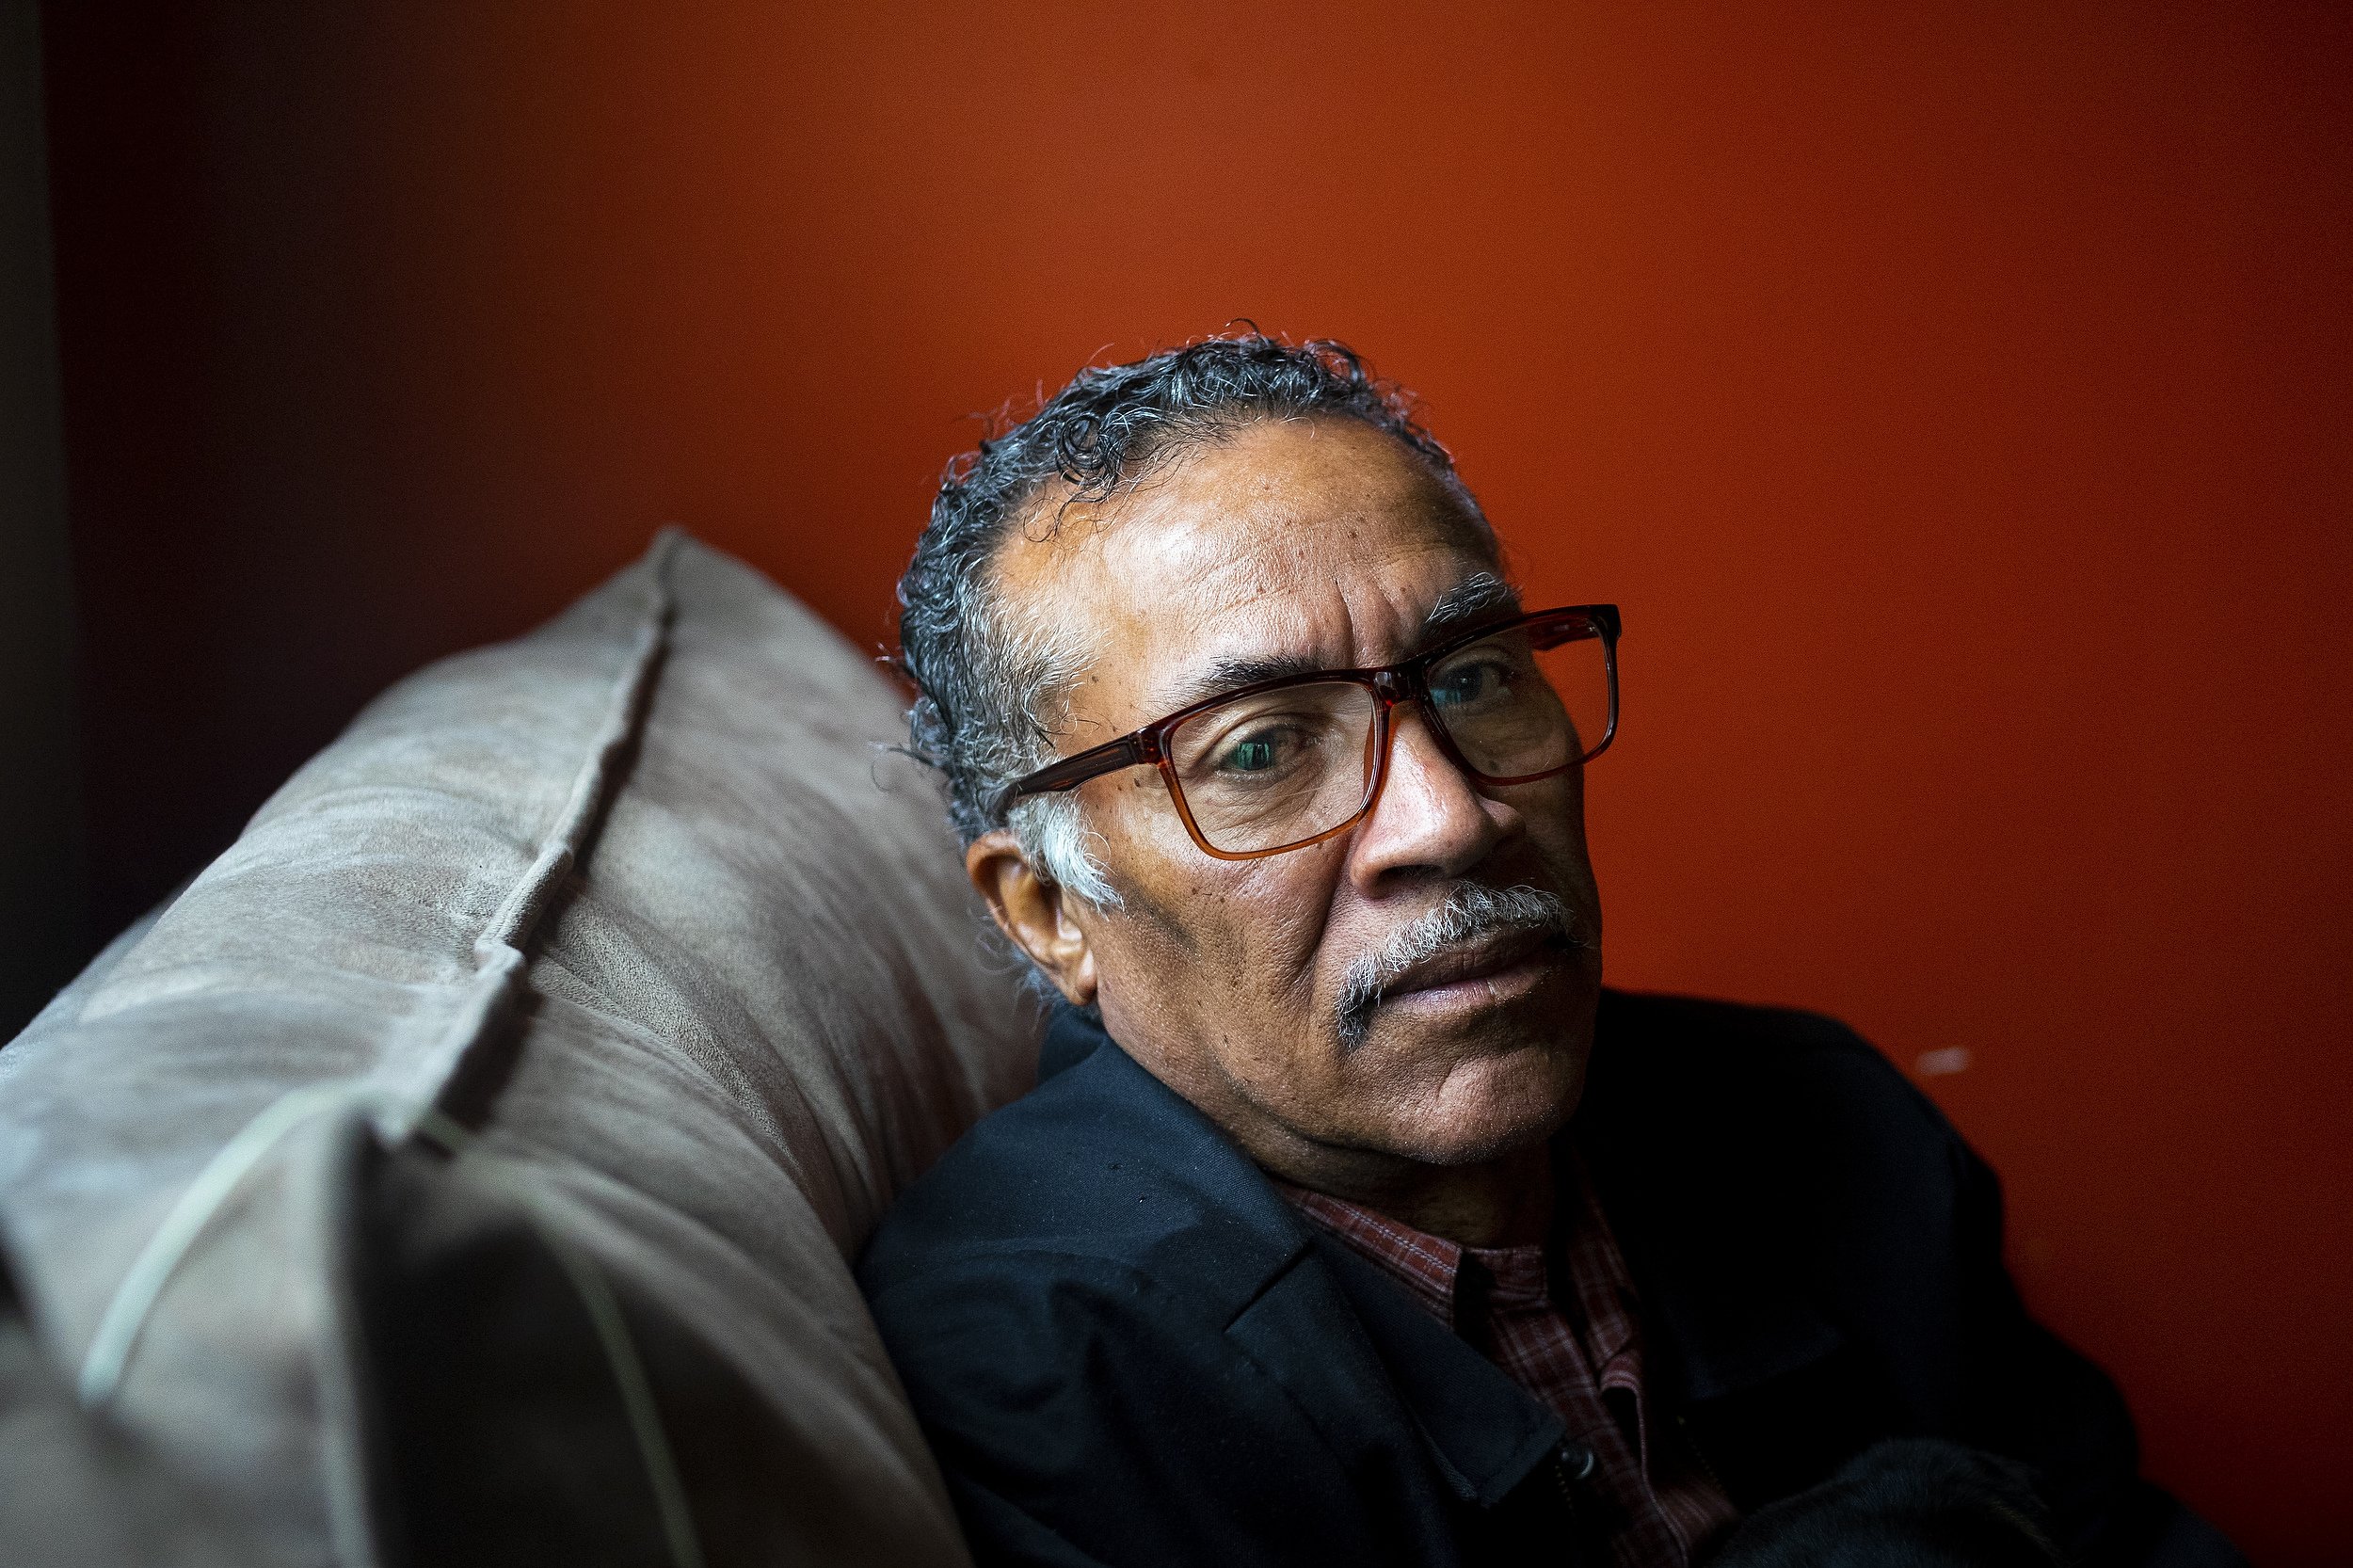  Lee Earley poses for a portrait inside his home on Thursday, April 8, 2021, in Detroit. Earley, 65, has been trying to start a private security guard agency, but his two felony convictions from over 20 years ago for cashing a bad check and carrying 